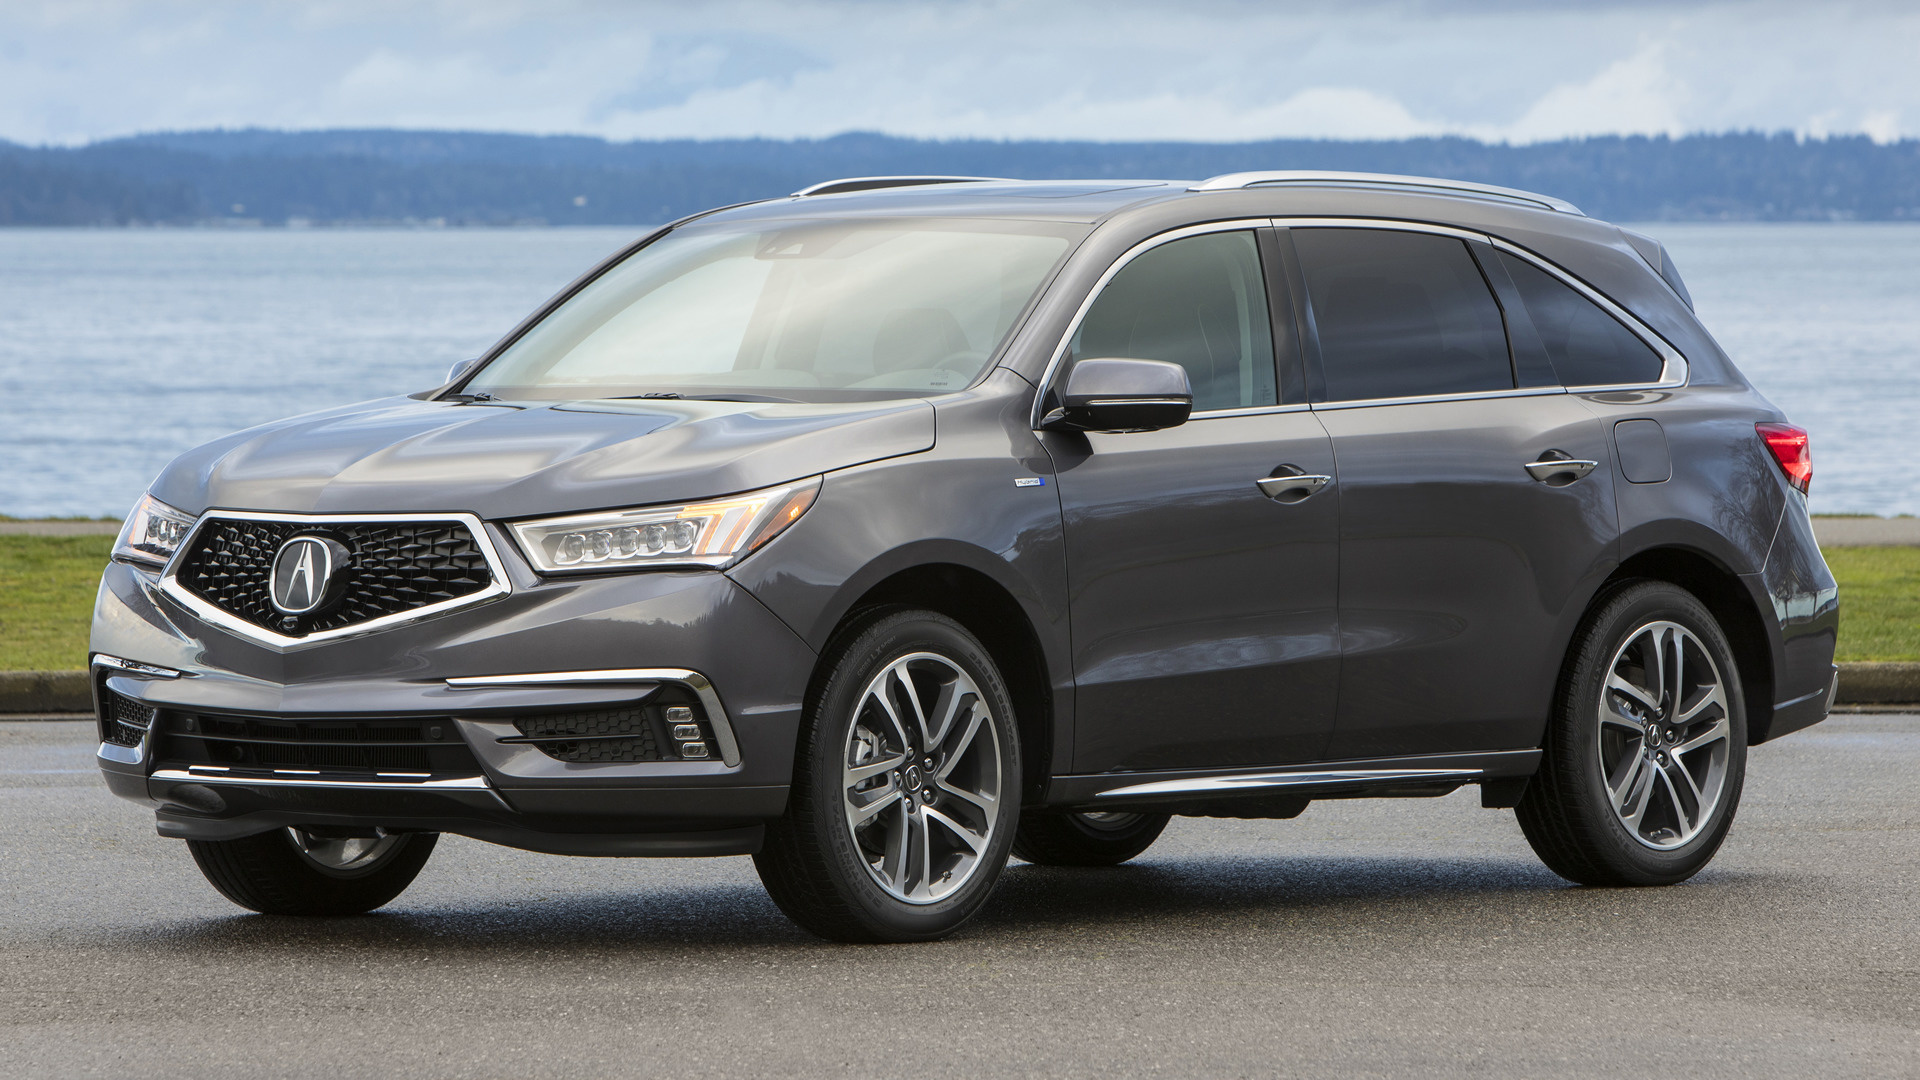 Acura Mdx Wallpaper Image Group